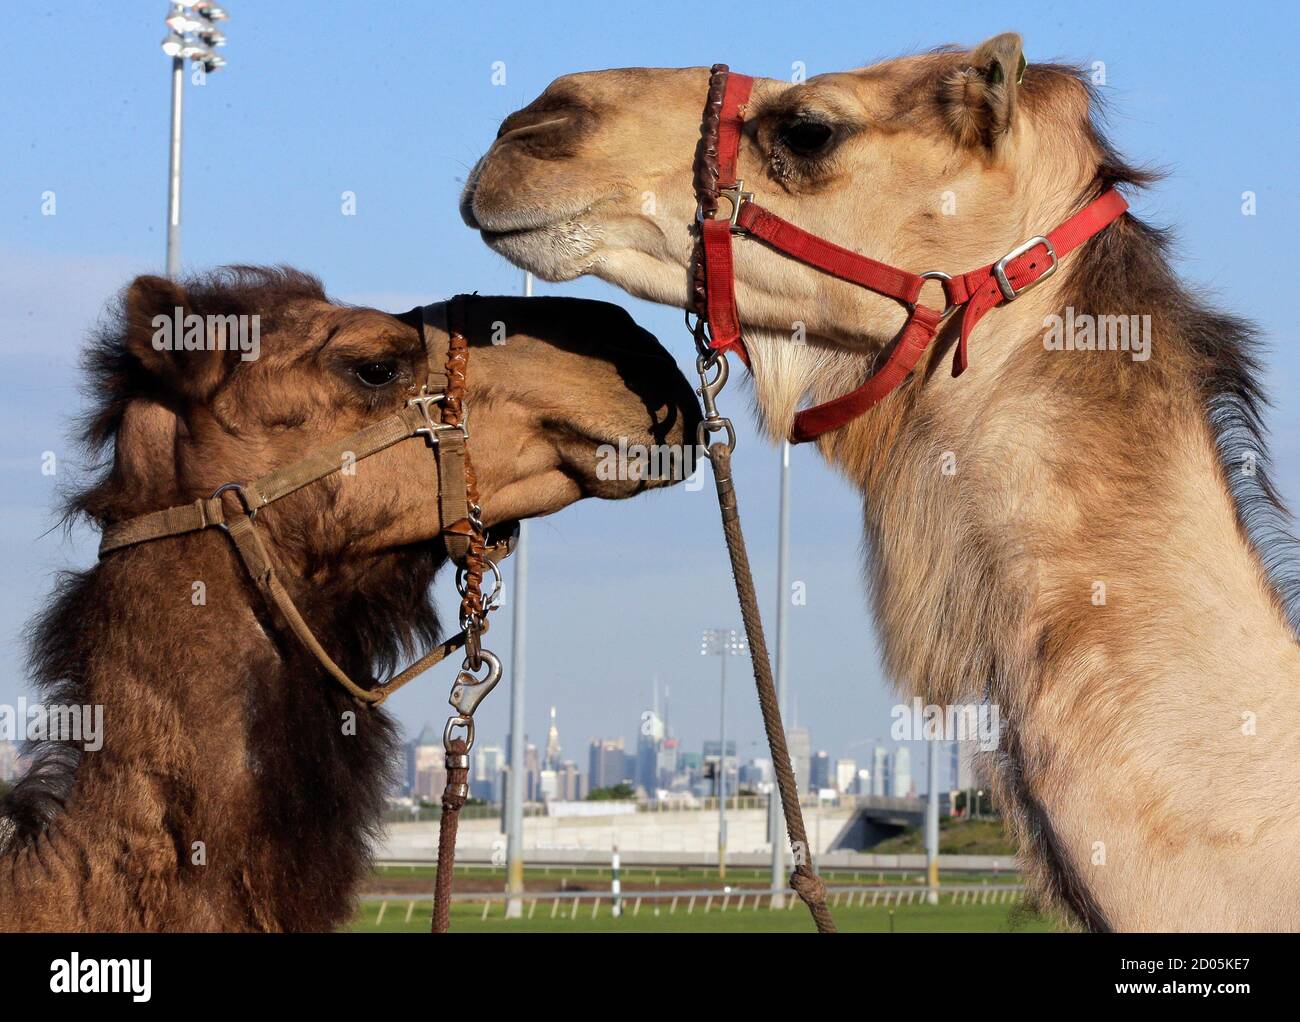 Two camels look at each other with the New York City skyline behind them,  as they are exercised before an exhibition race billed as "The Cameltonian"  at the Meadowlands Race Track in